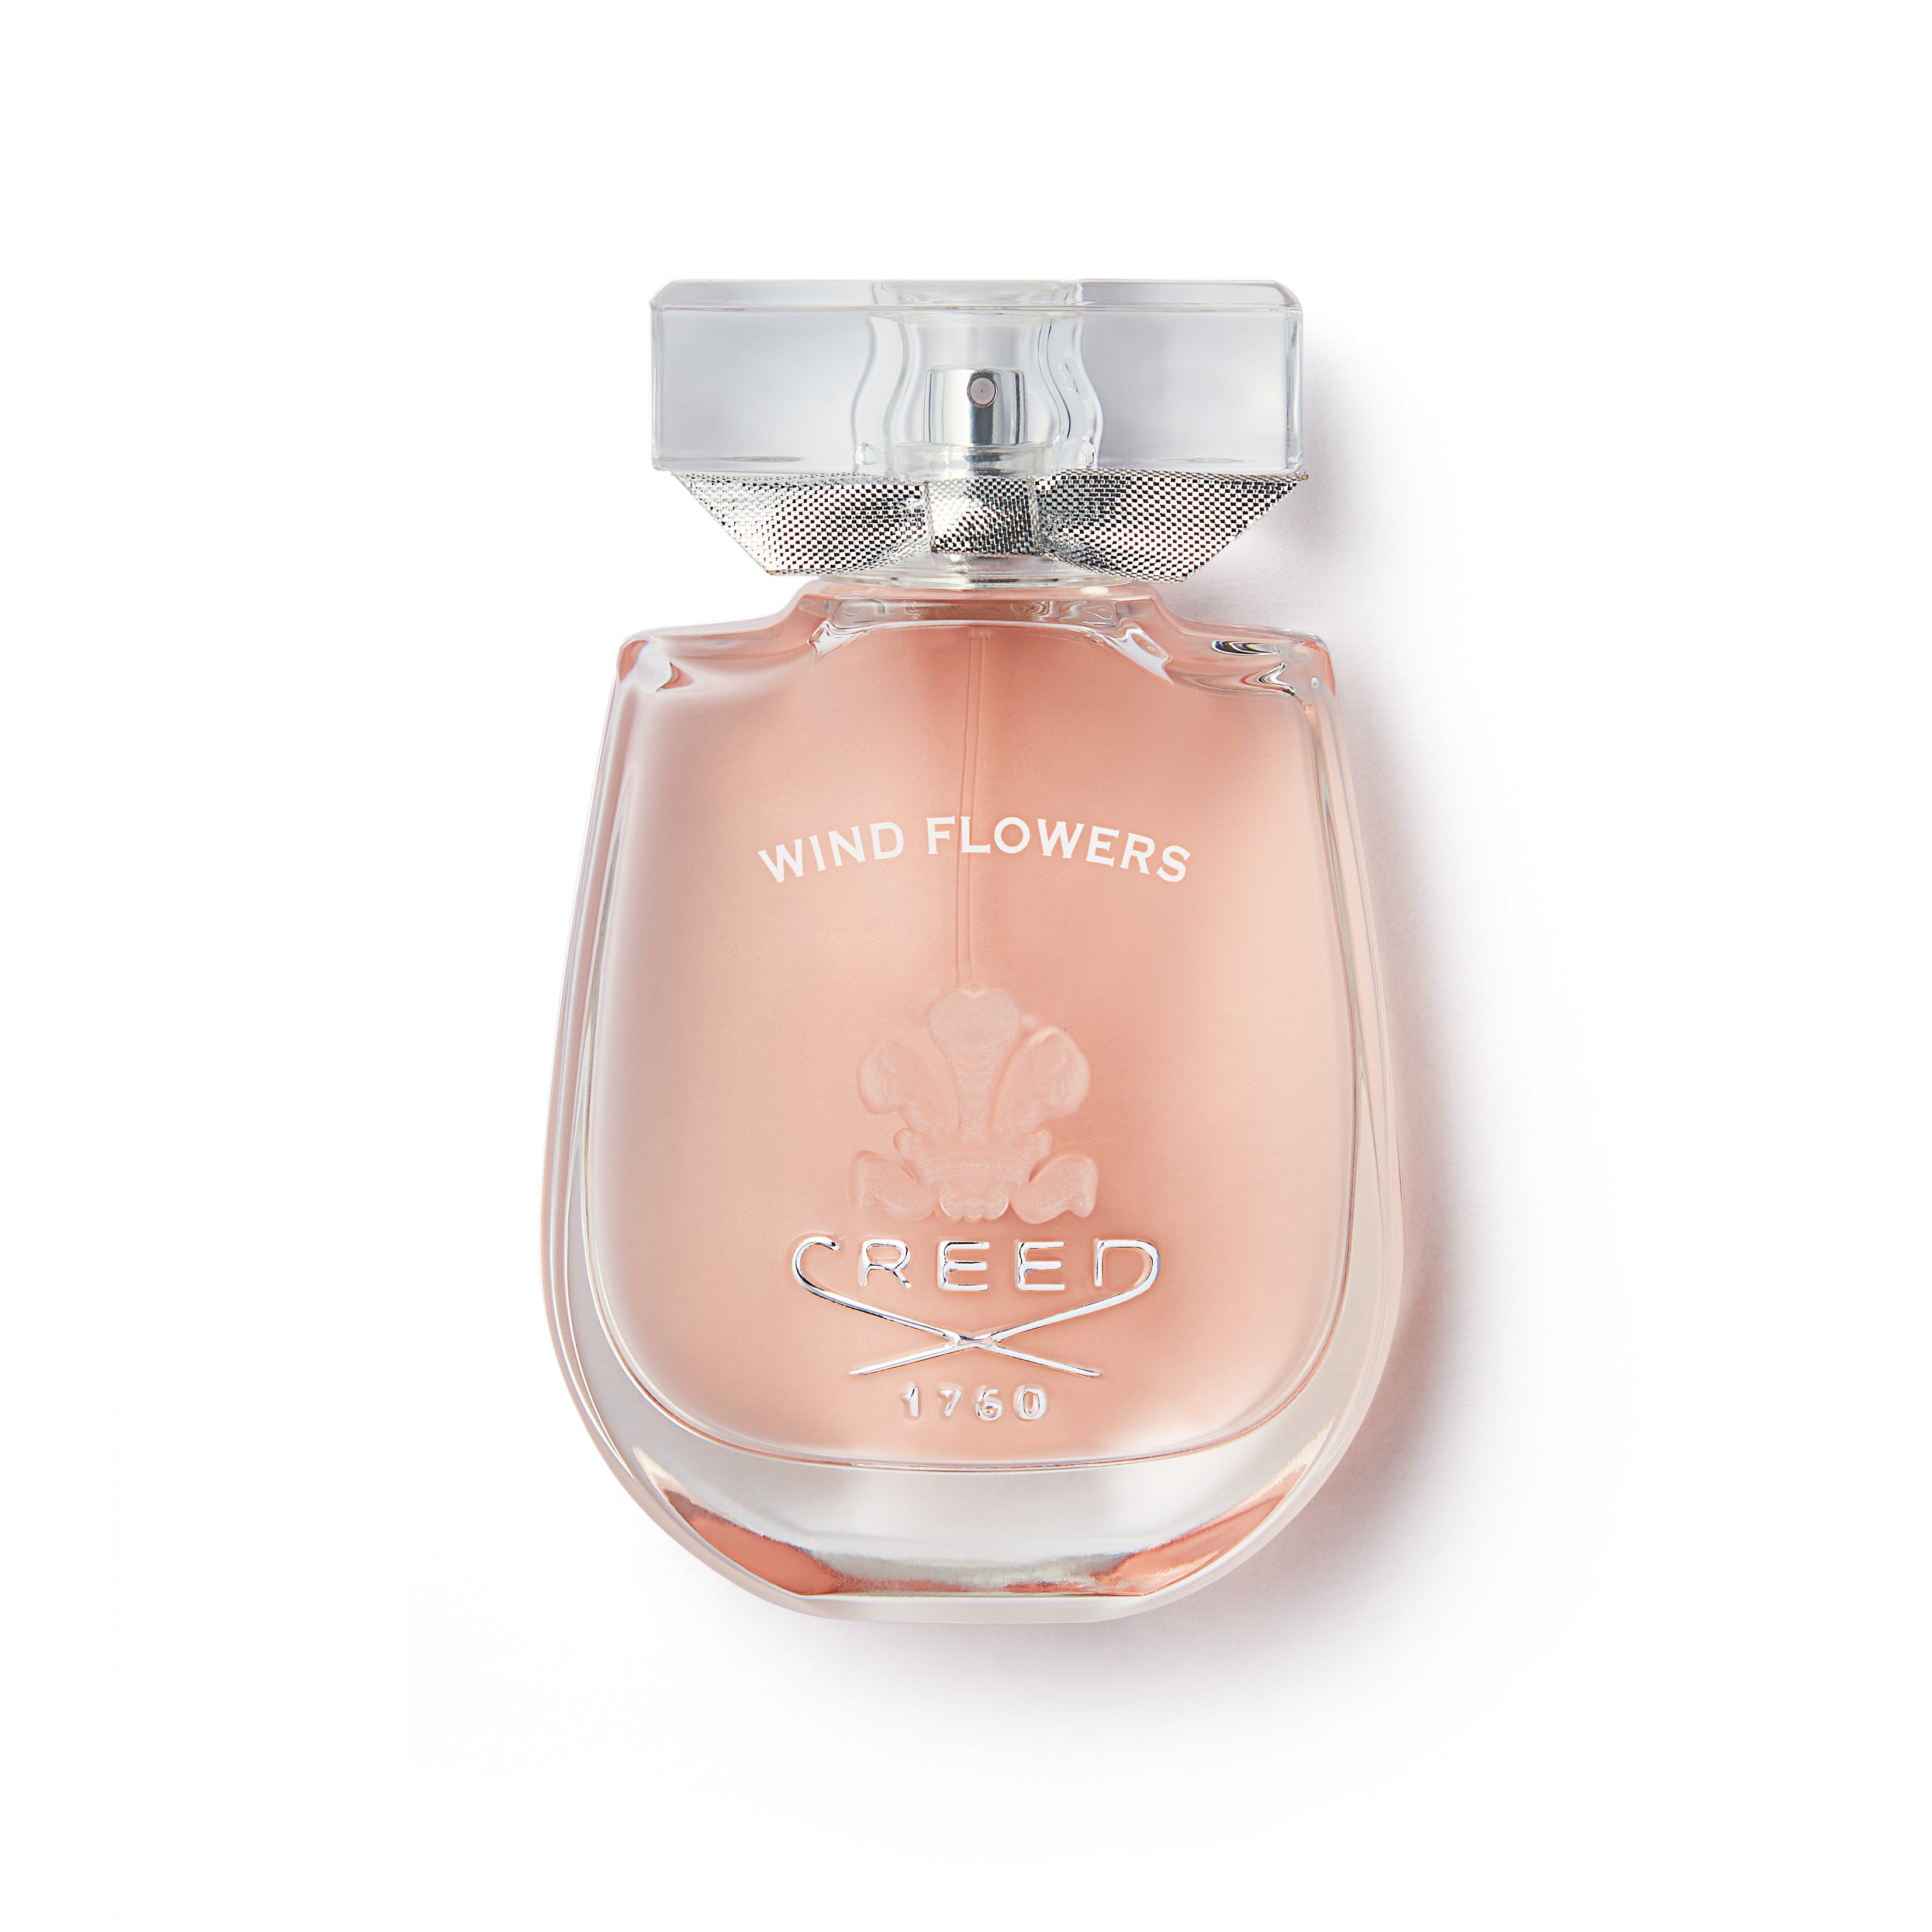 Image Of Creed Wind Flowers 75ML Glass Transparent Bottle With Rectangular Glass Cap